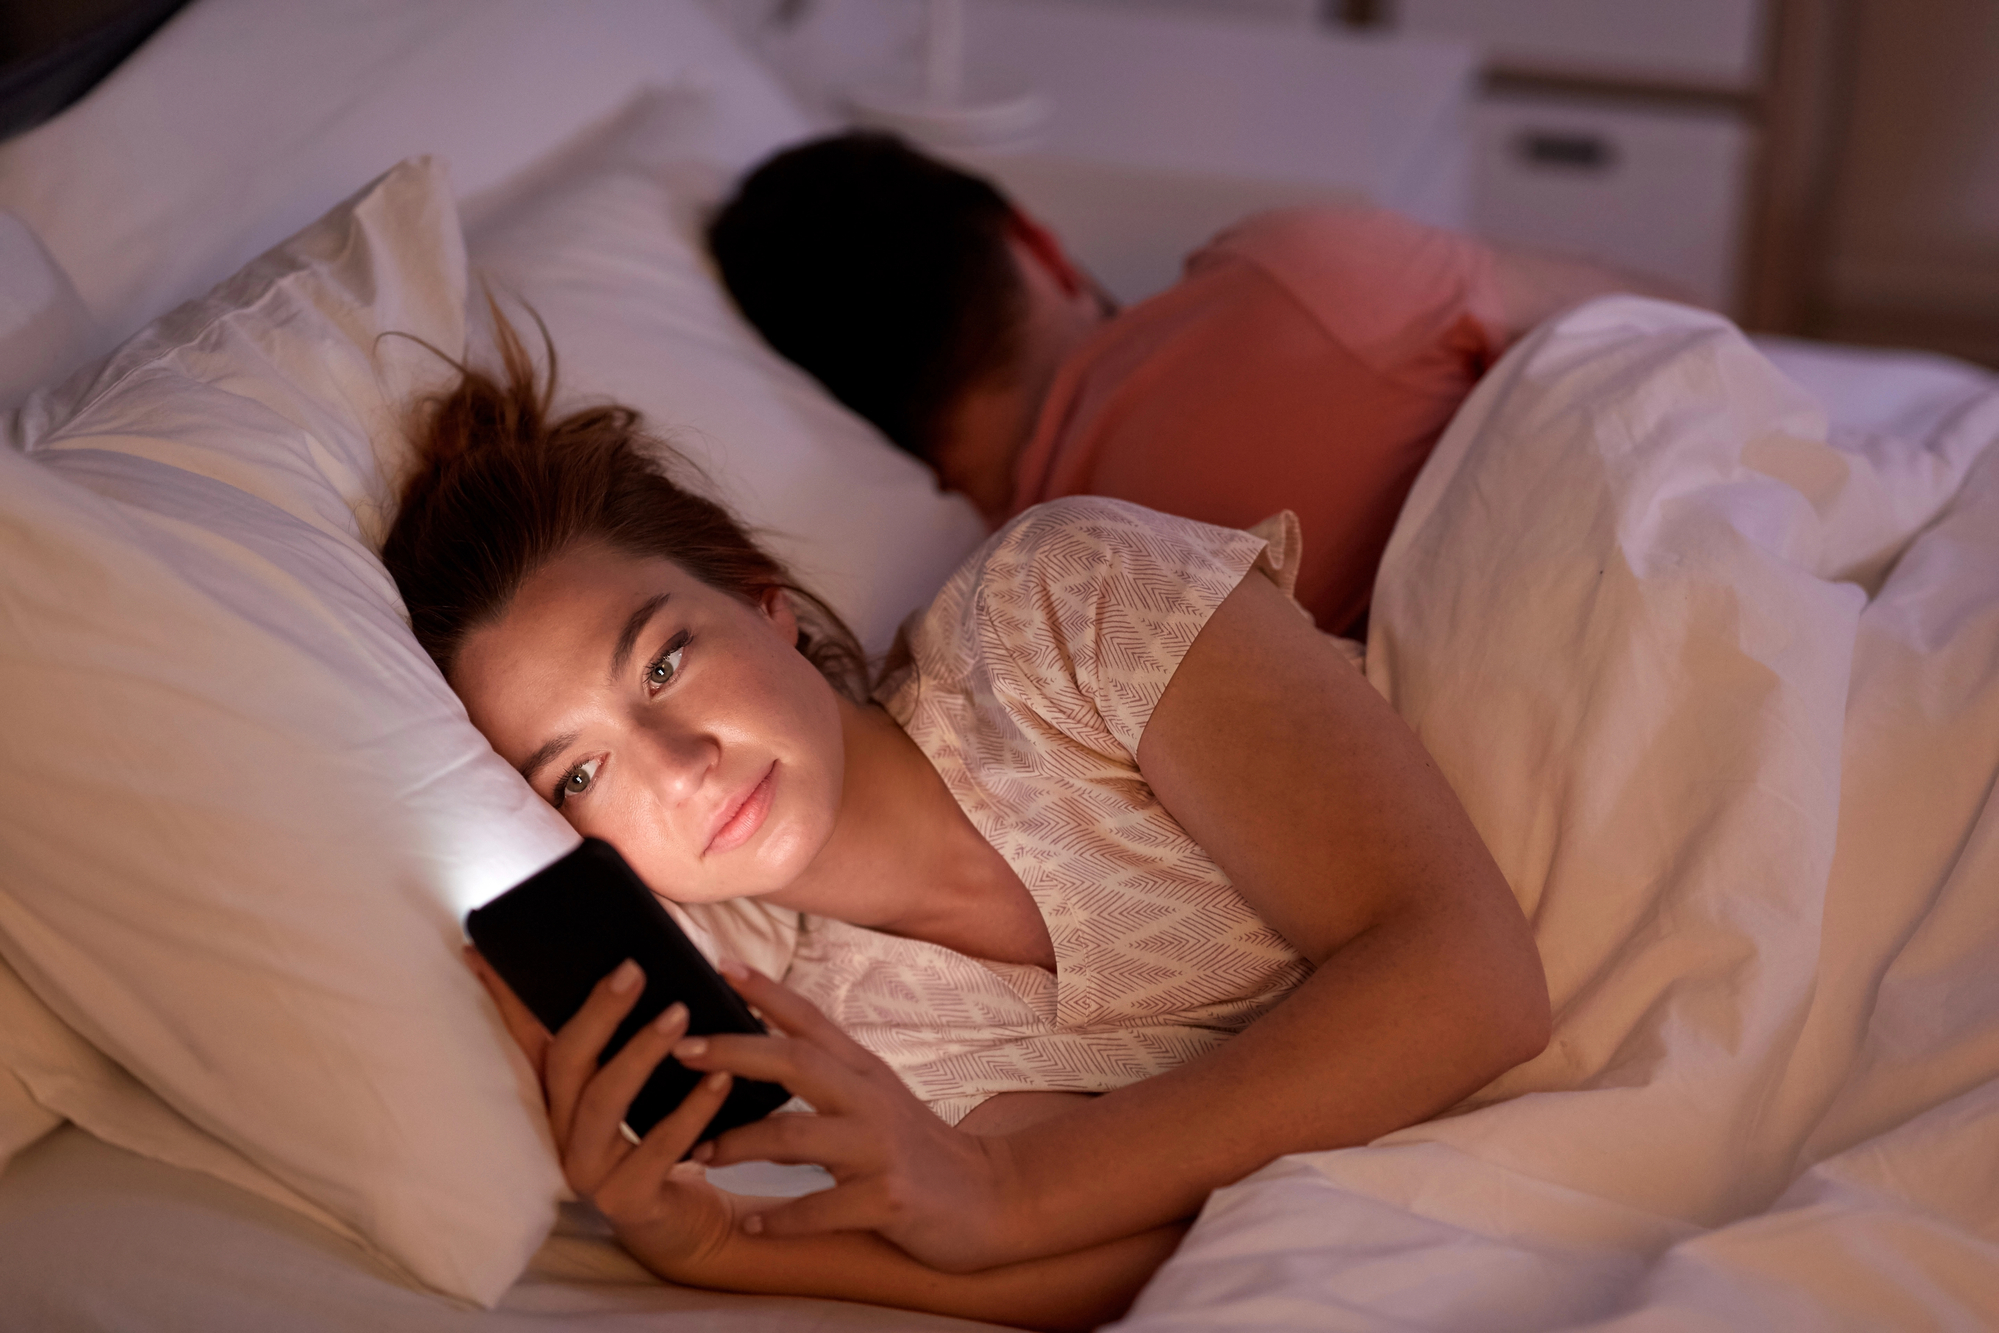 A woman is lying in bed at night, using her smartphone which is illuminating her face. She appears focused on the screen. Beside her, another person is lying down, facing away and seemingly asleep. They are under white bedcovers.